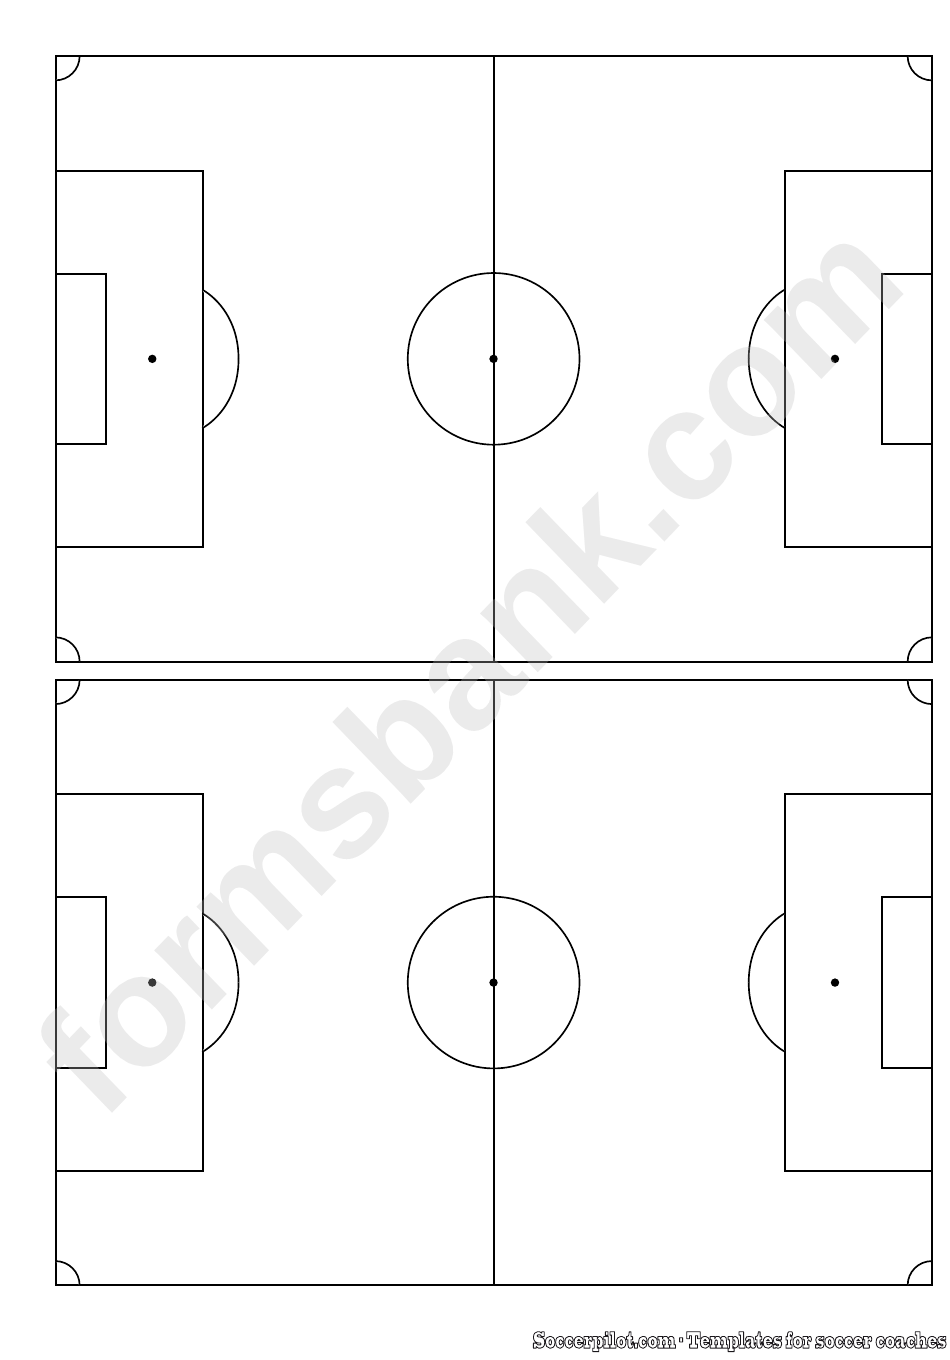 2 Soccer Horizontally Pitches Field Template